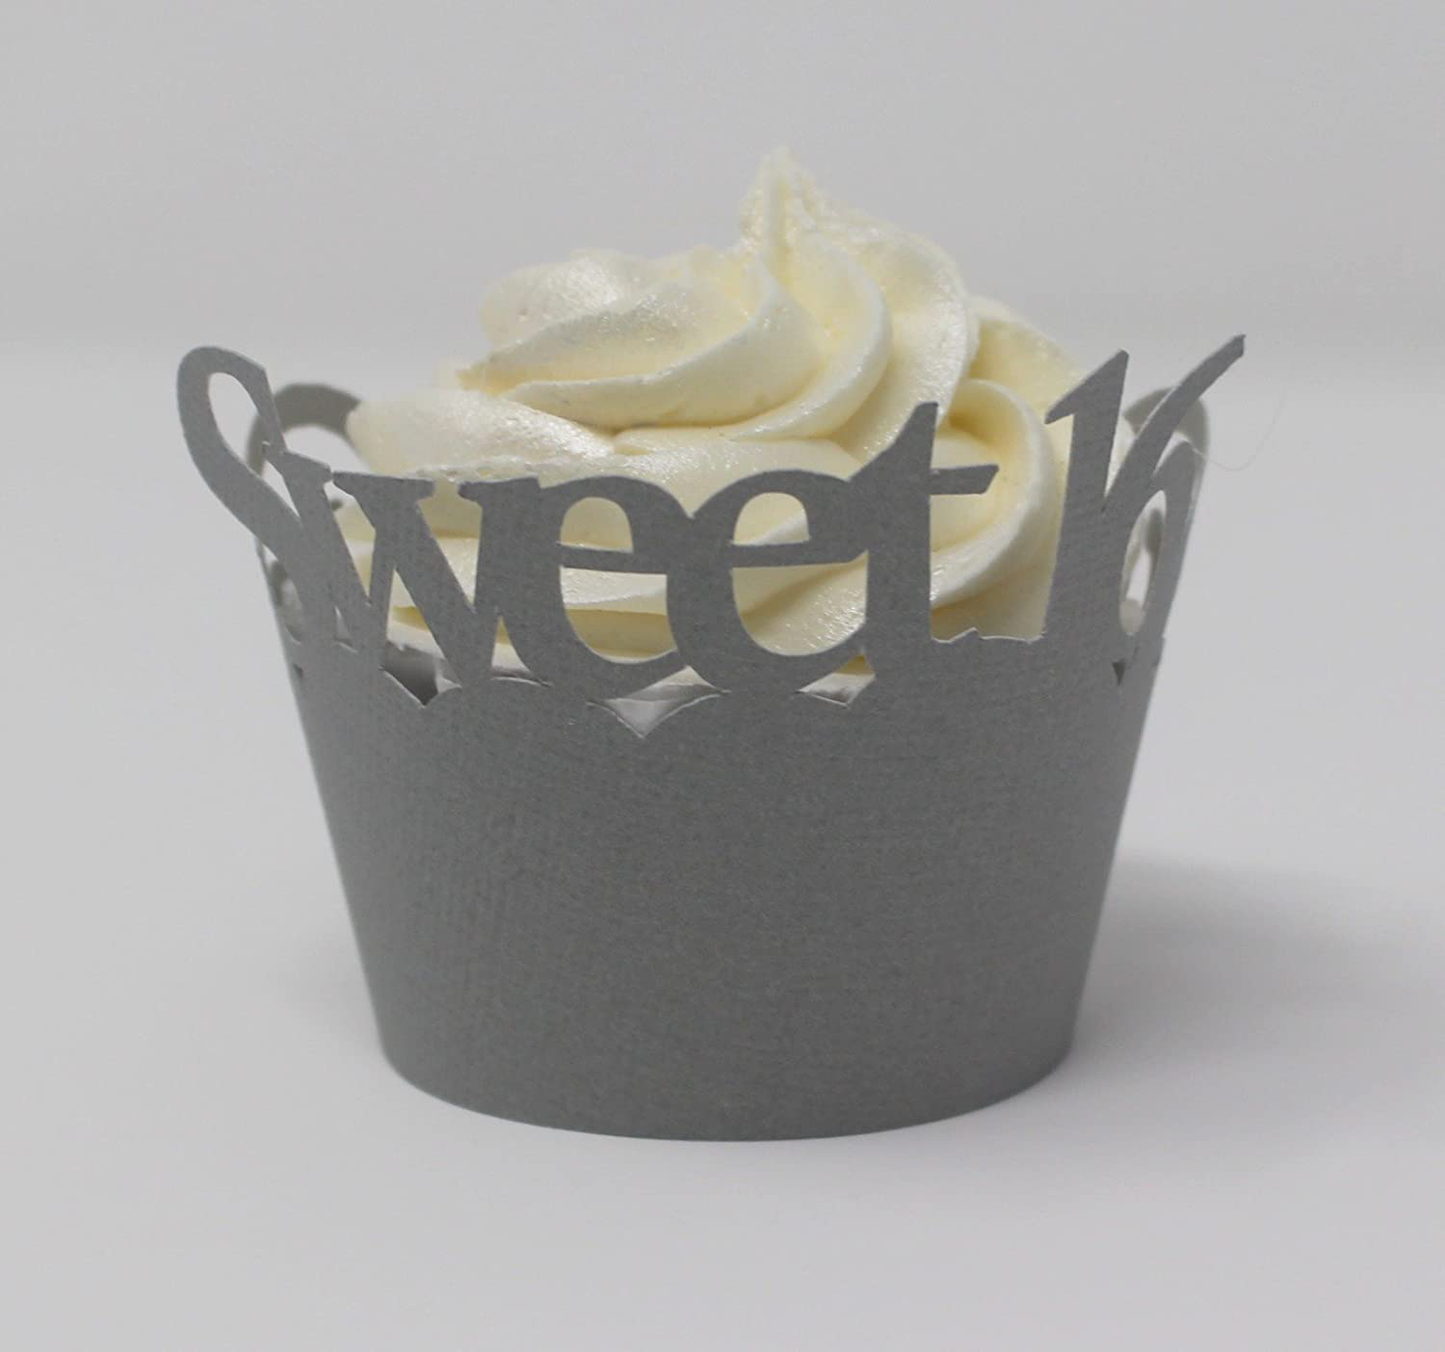 All About Details Sweet 16 Cupcake Wrappers, Set of 12 (Gray)